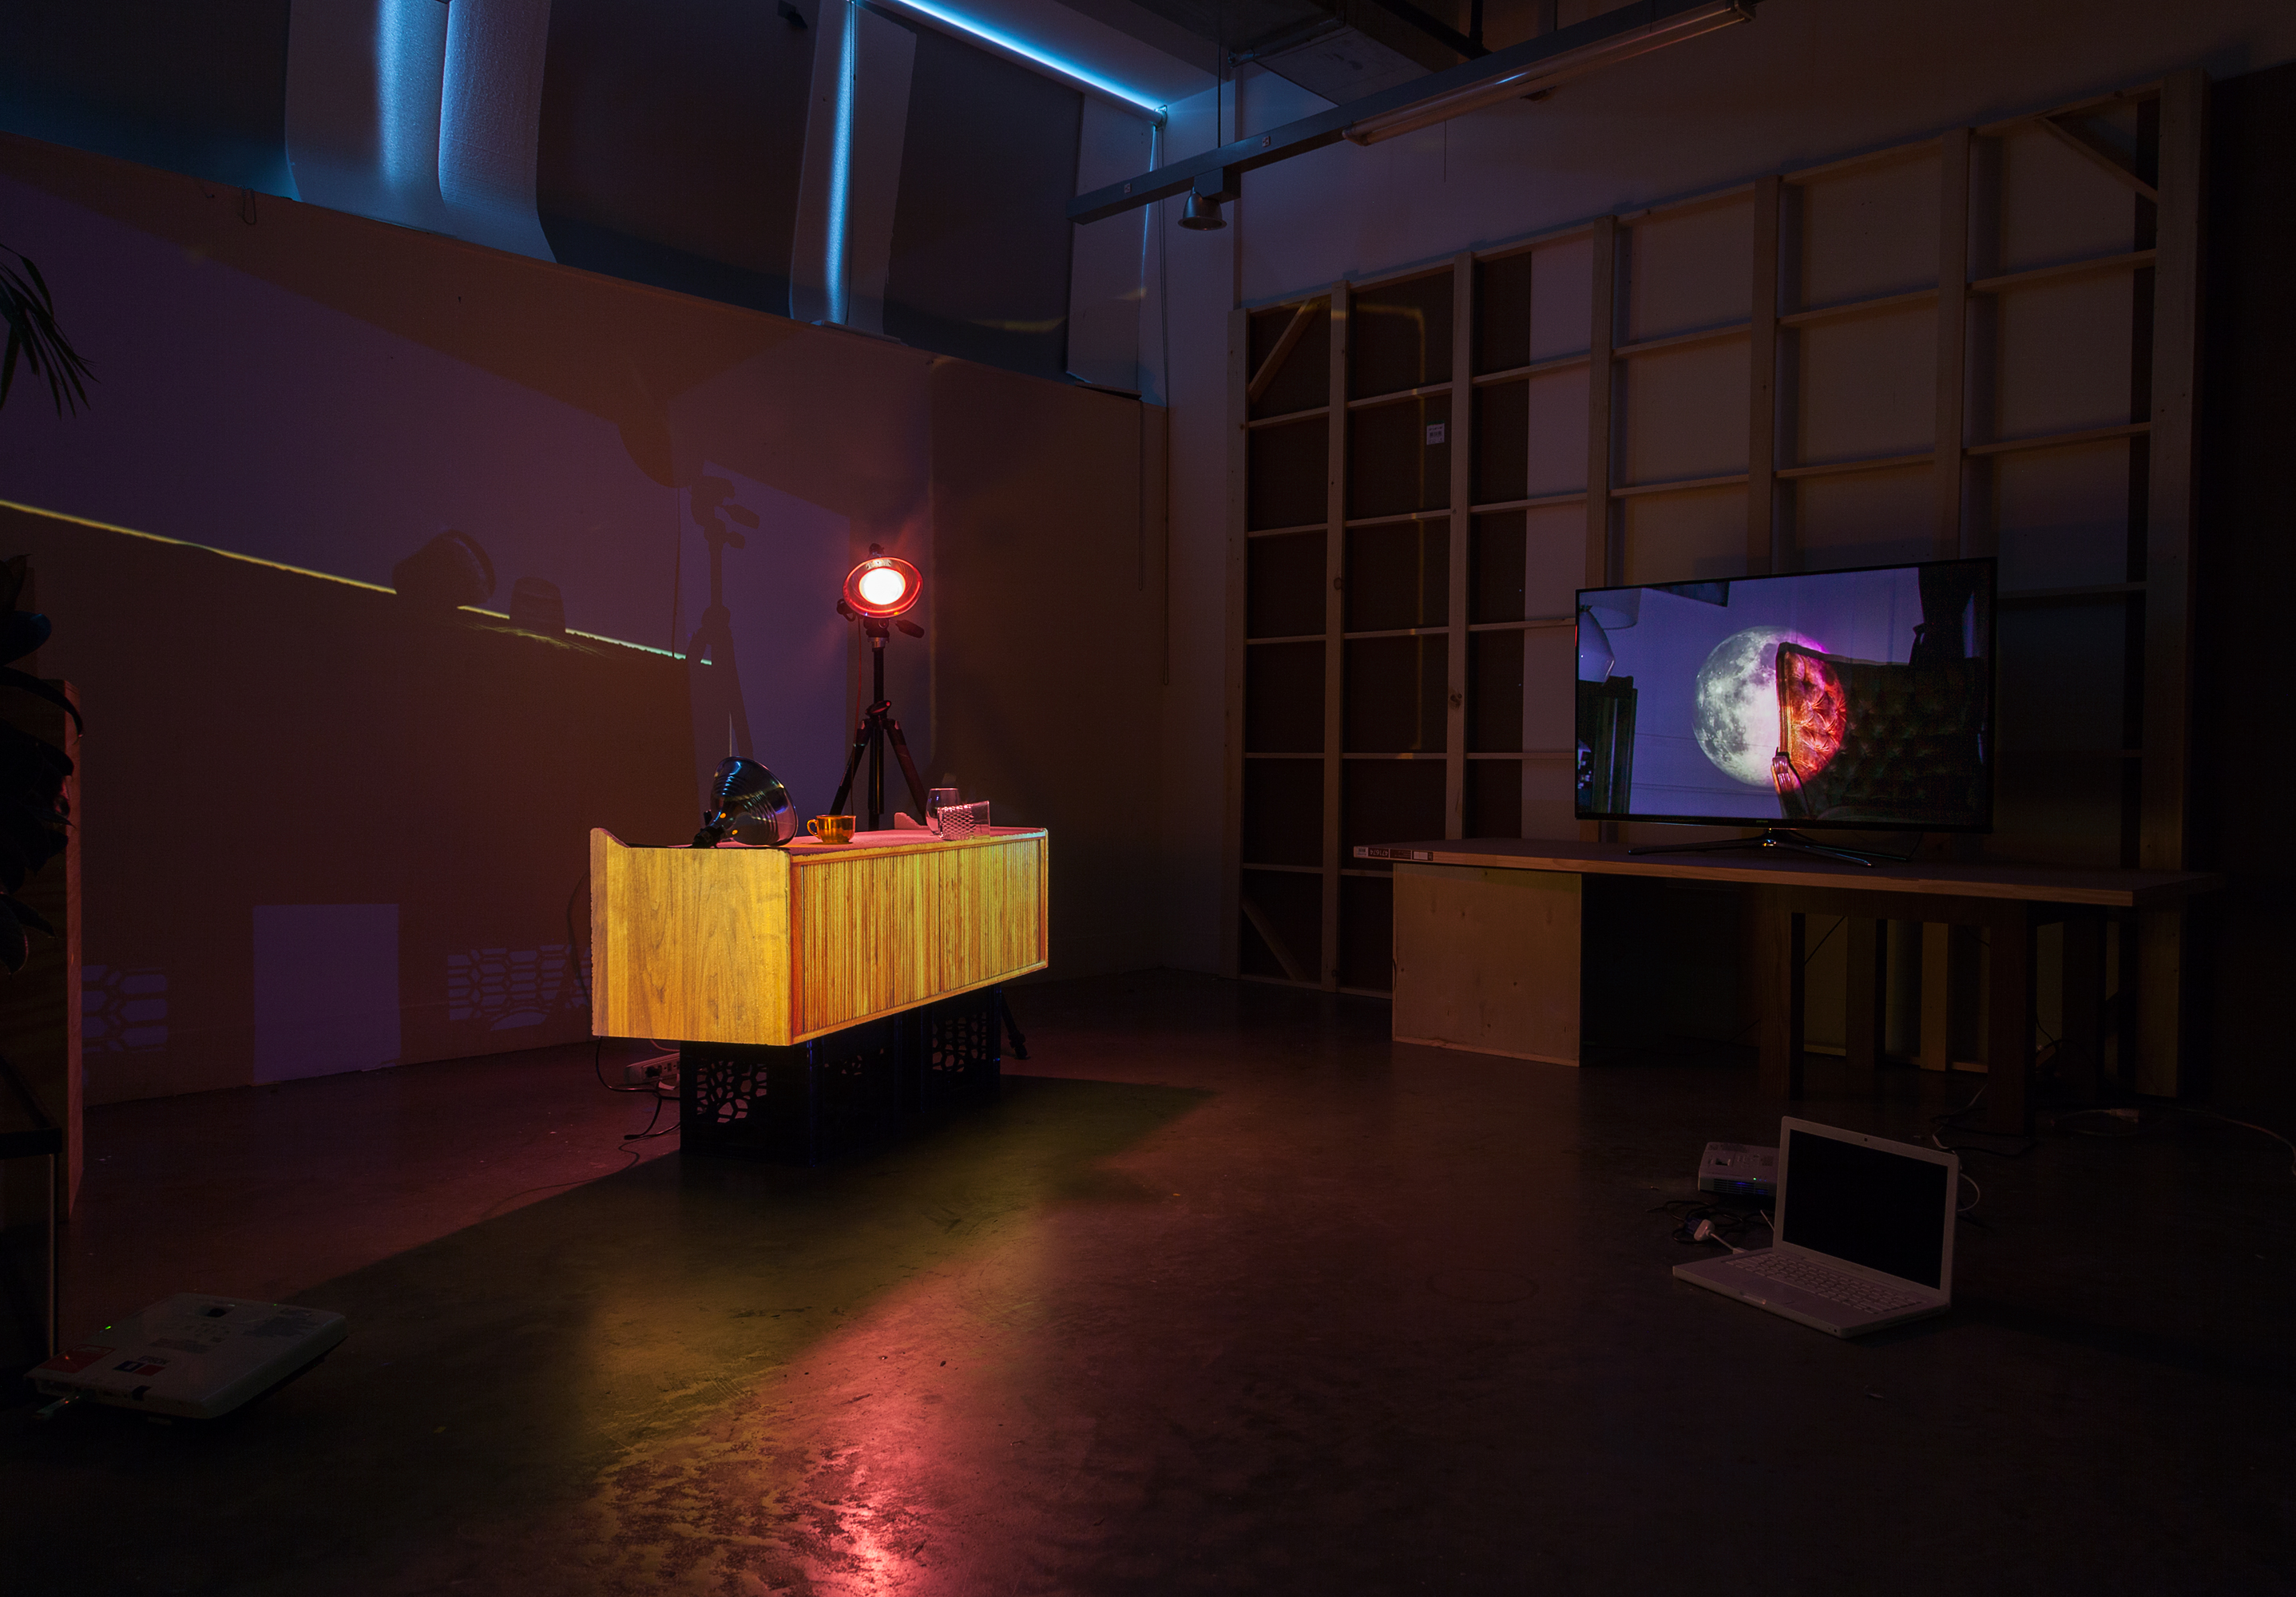 Kyle_Williams-03_UNTITLED_CONSOLE_2015_PROJECTION_ON_STYROFOAM_WITH_OBJECTS_VIEW_3_WITH_MOON_VIDEO_INSTALLED_